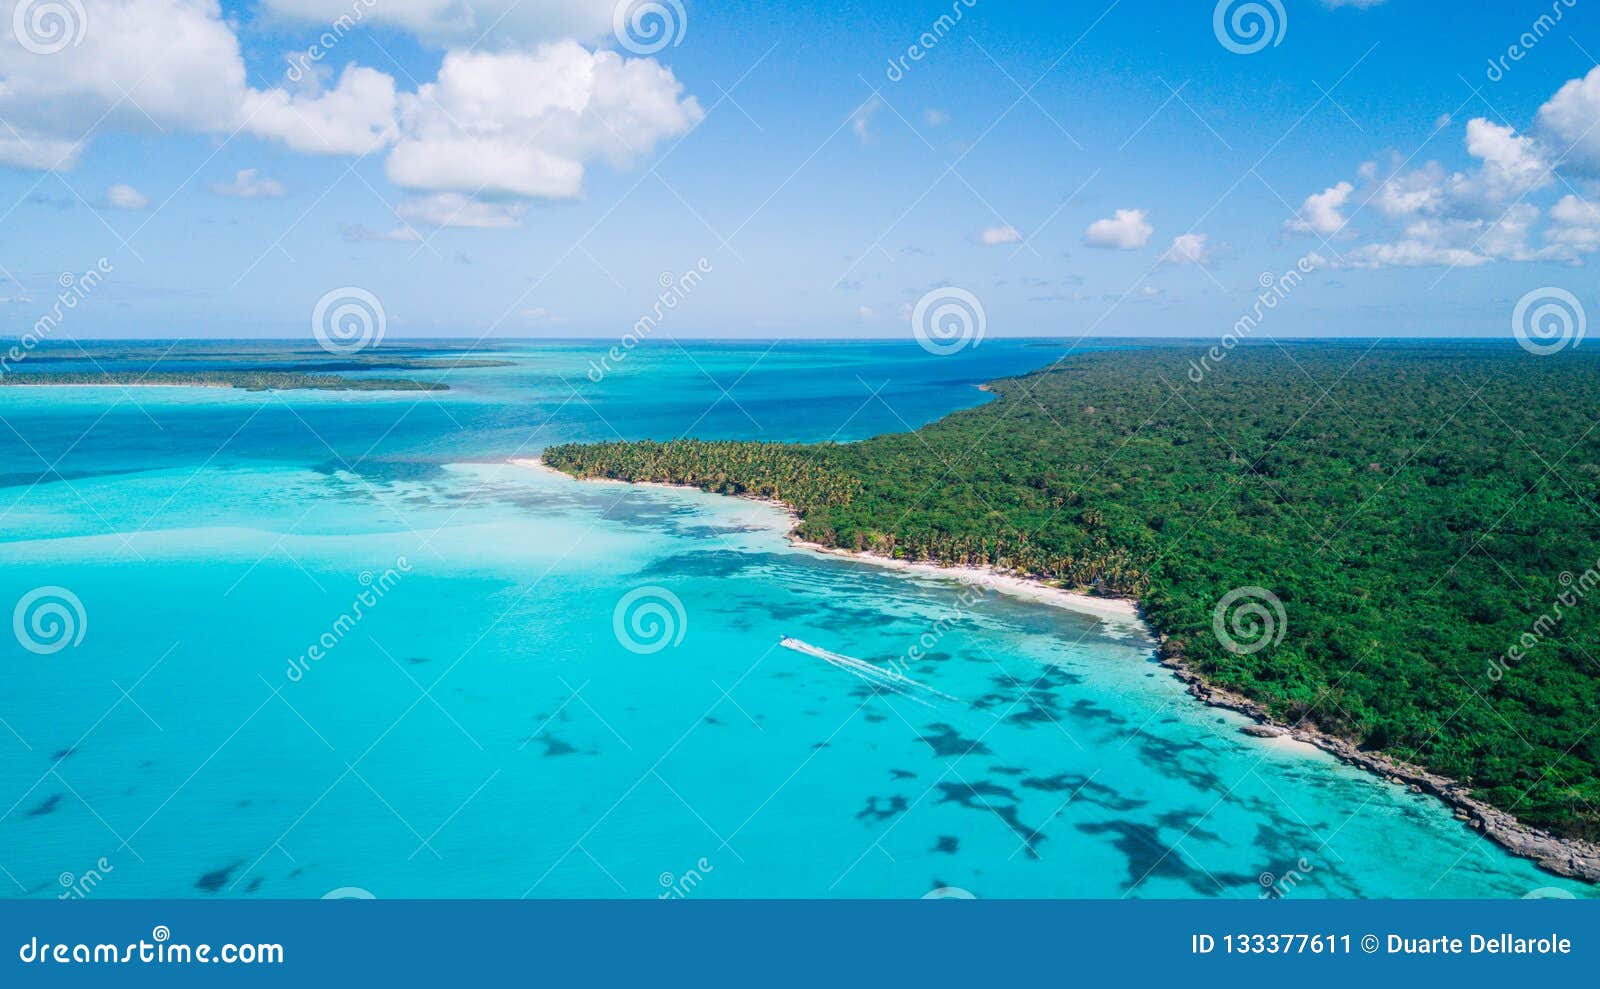 aerial drone view of saona island in punta cana, dominican republic